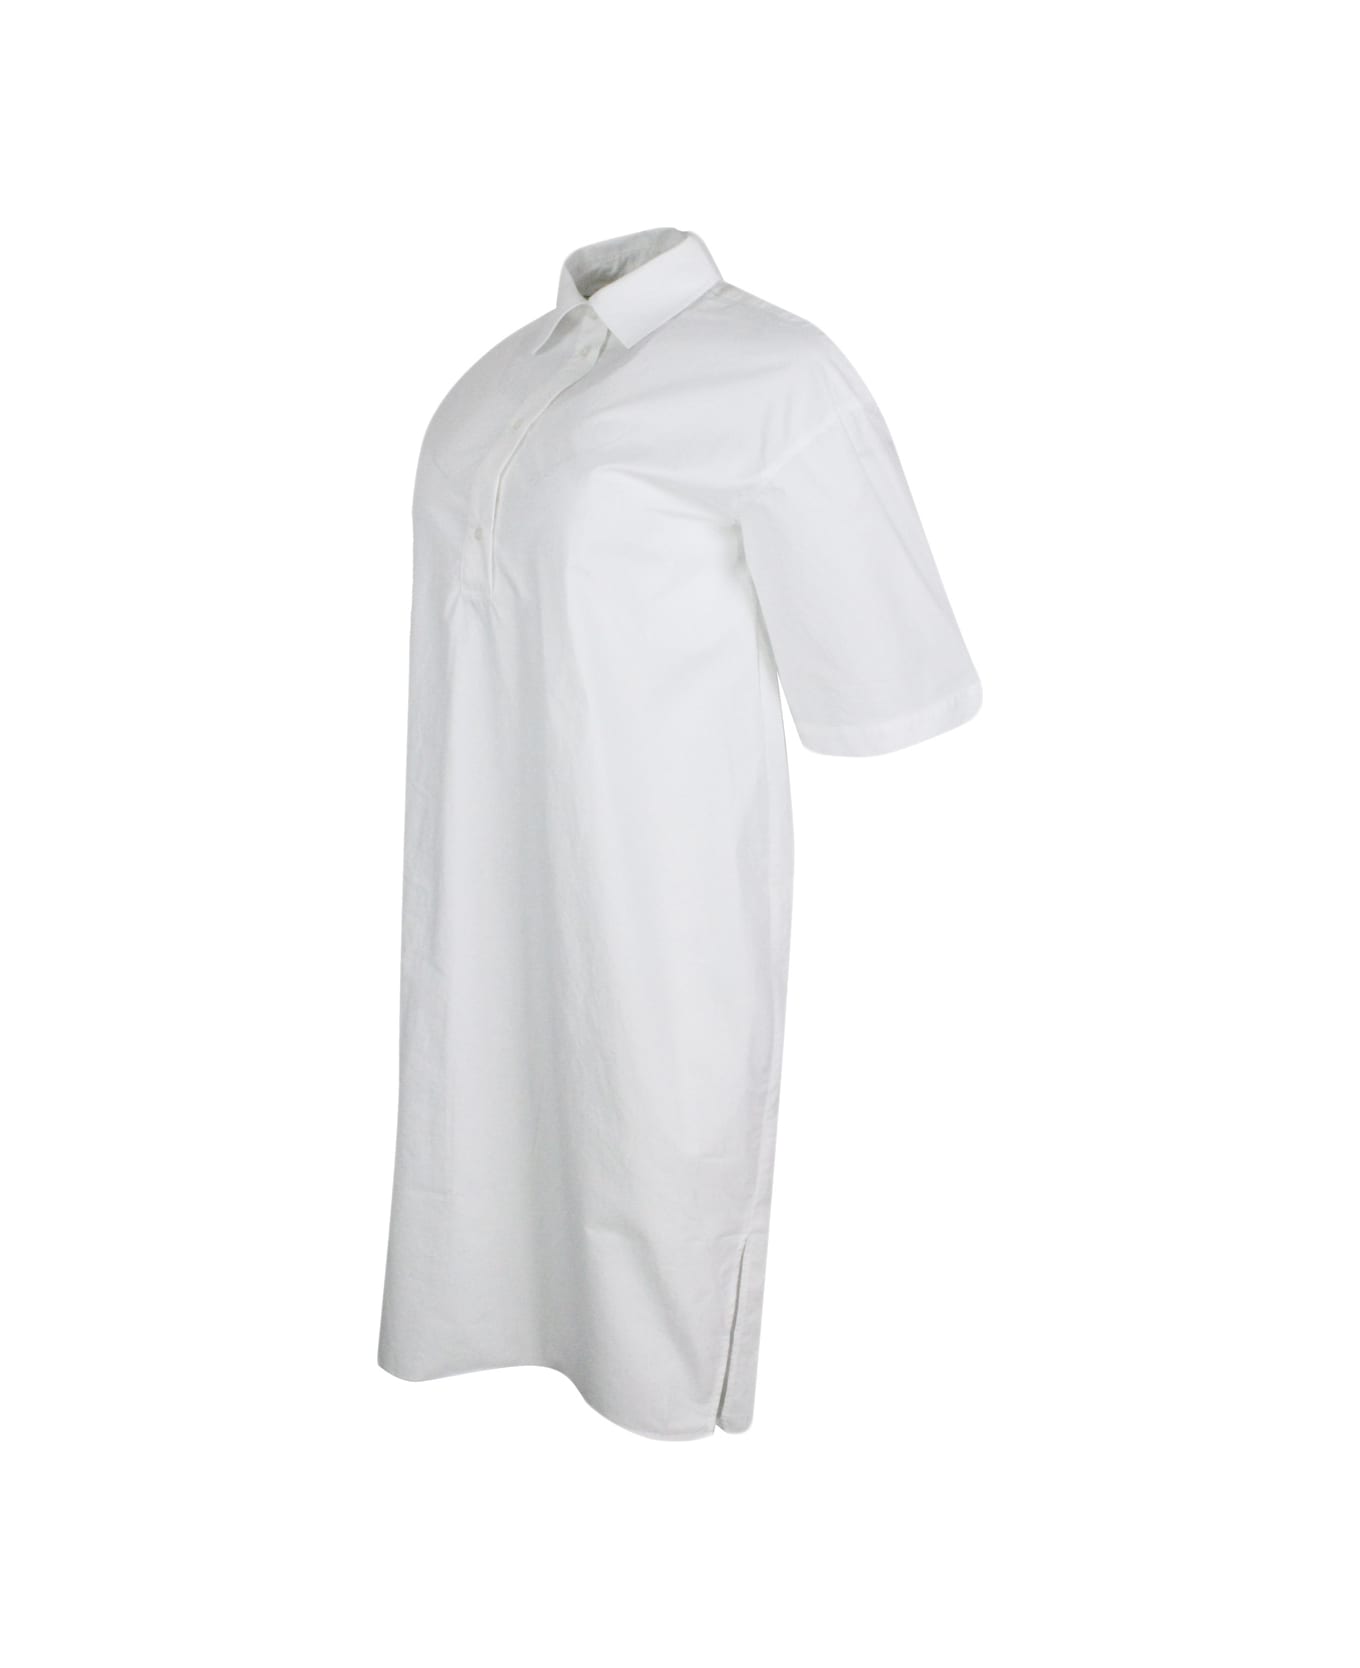 Armani Collezioni Dress Made Of Soft Cotton With Short Sleeves, With Collar And 4 Button Closure. Side Slits On The Bottom. - White